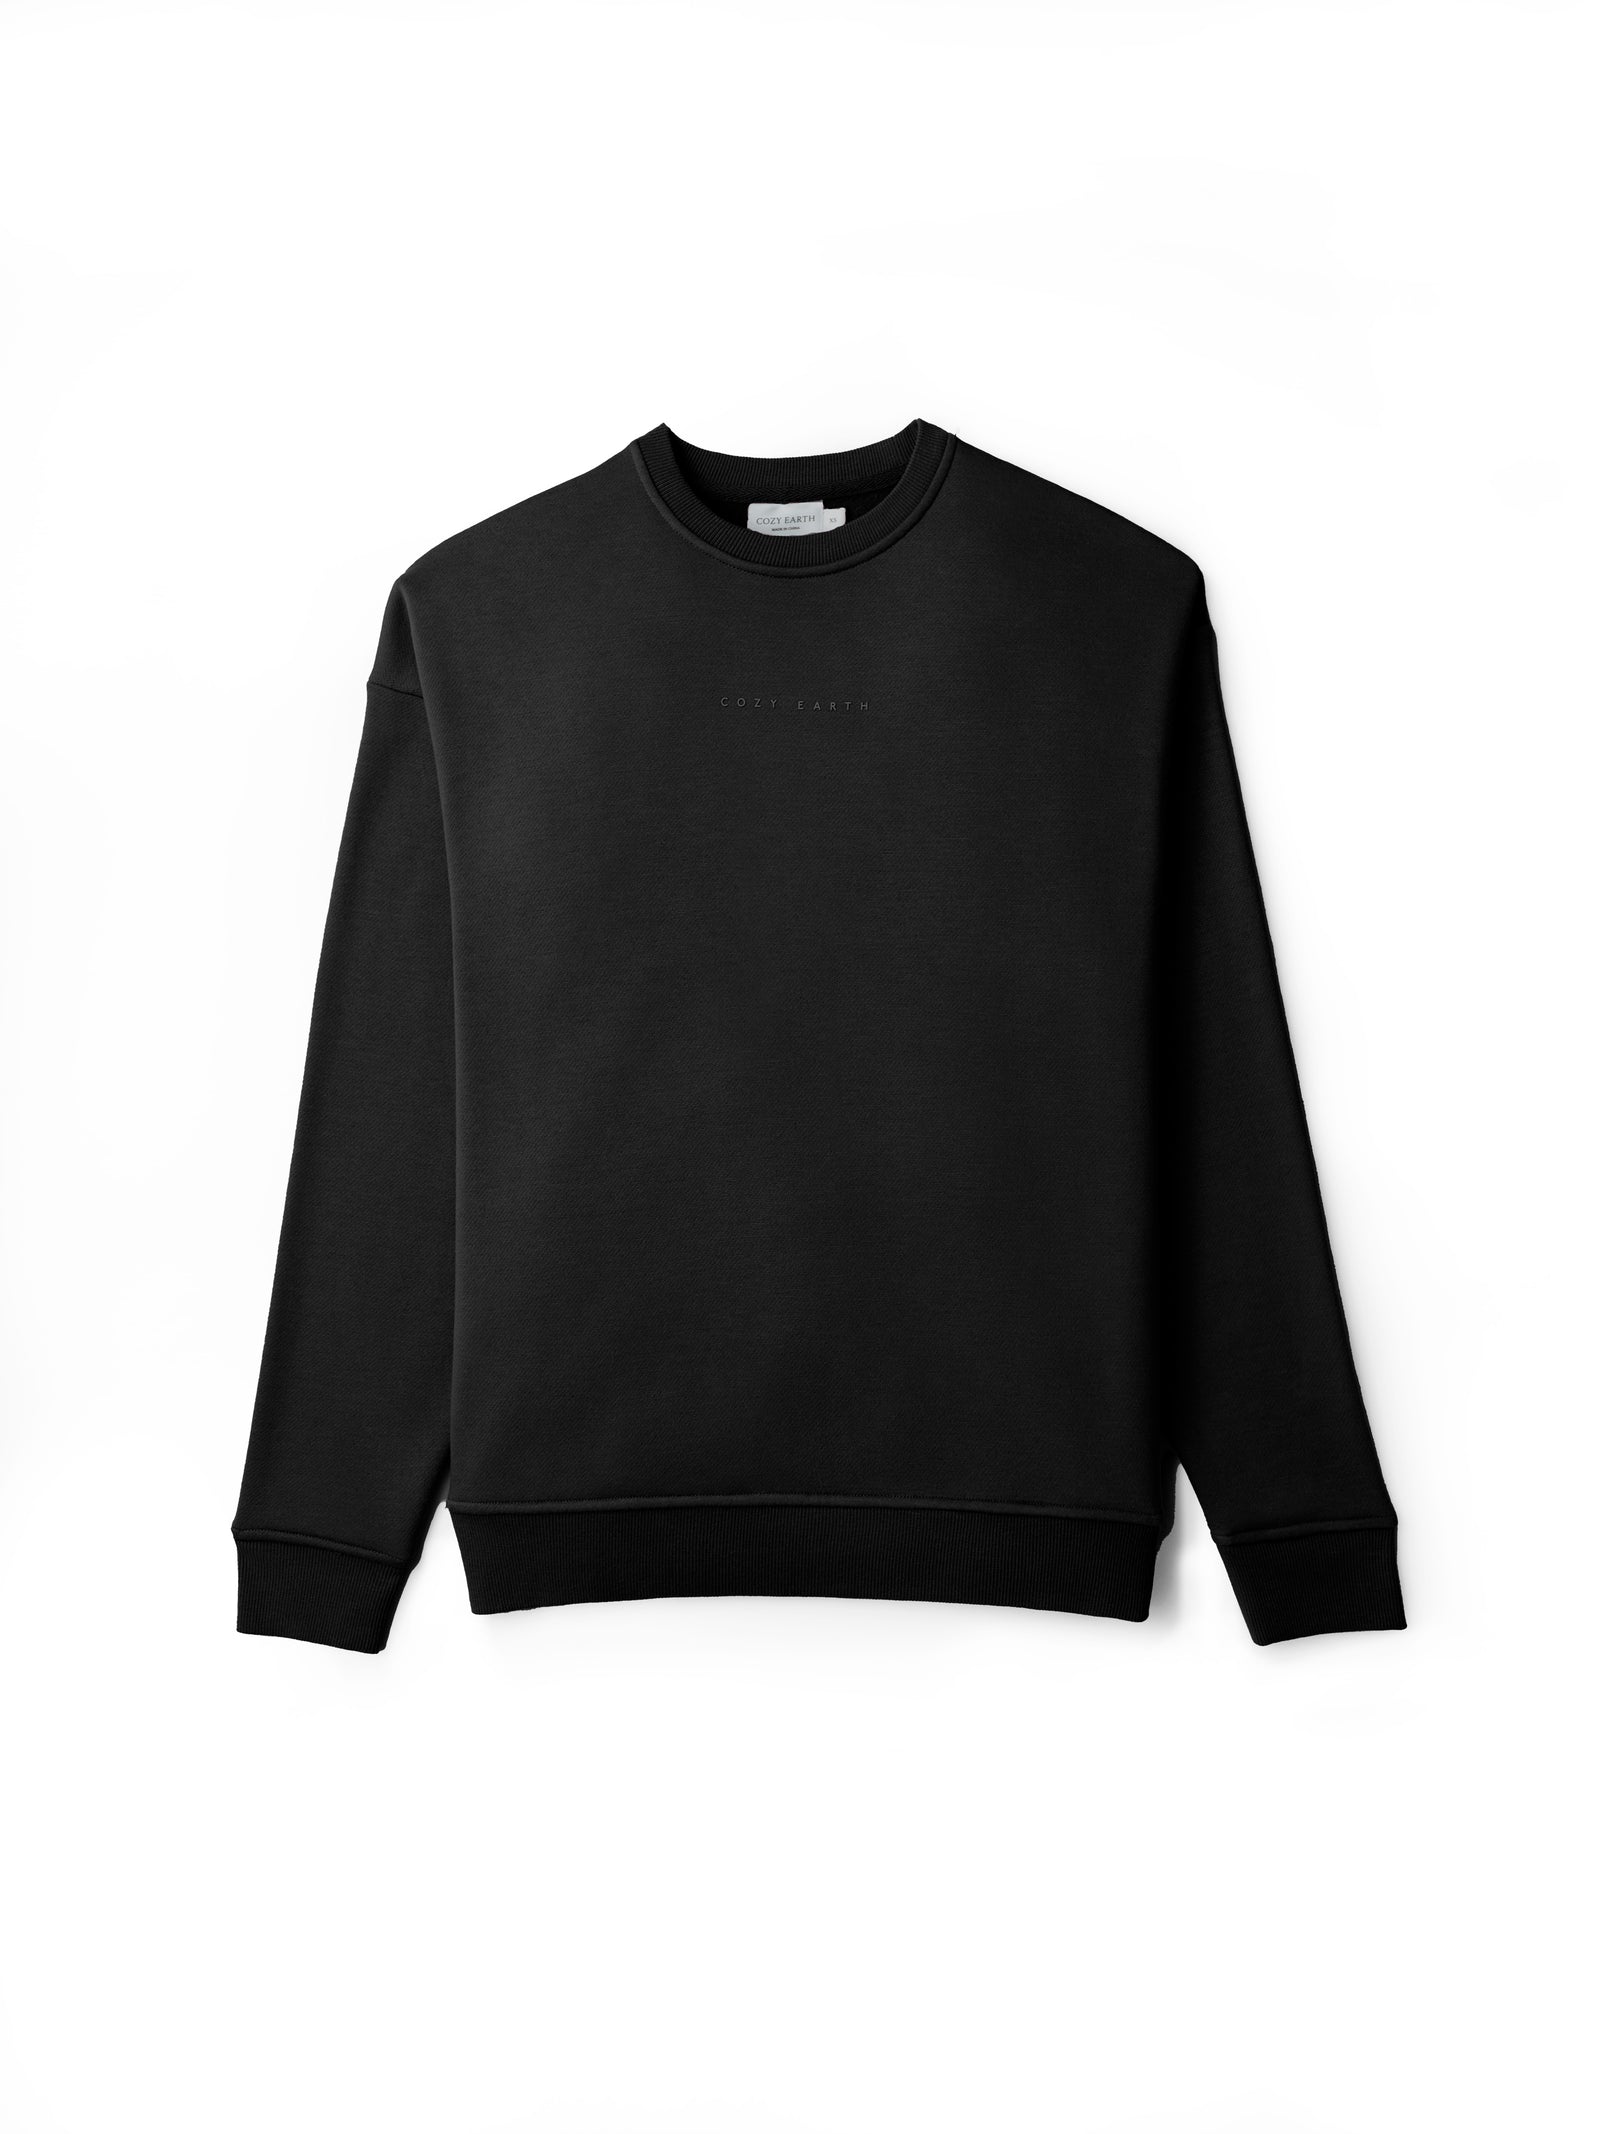 Black CityScape Pullover Crew laying flat on a white background. 